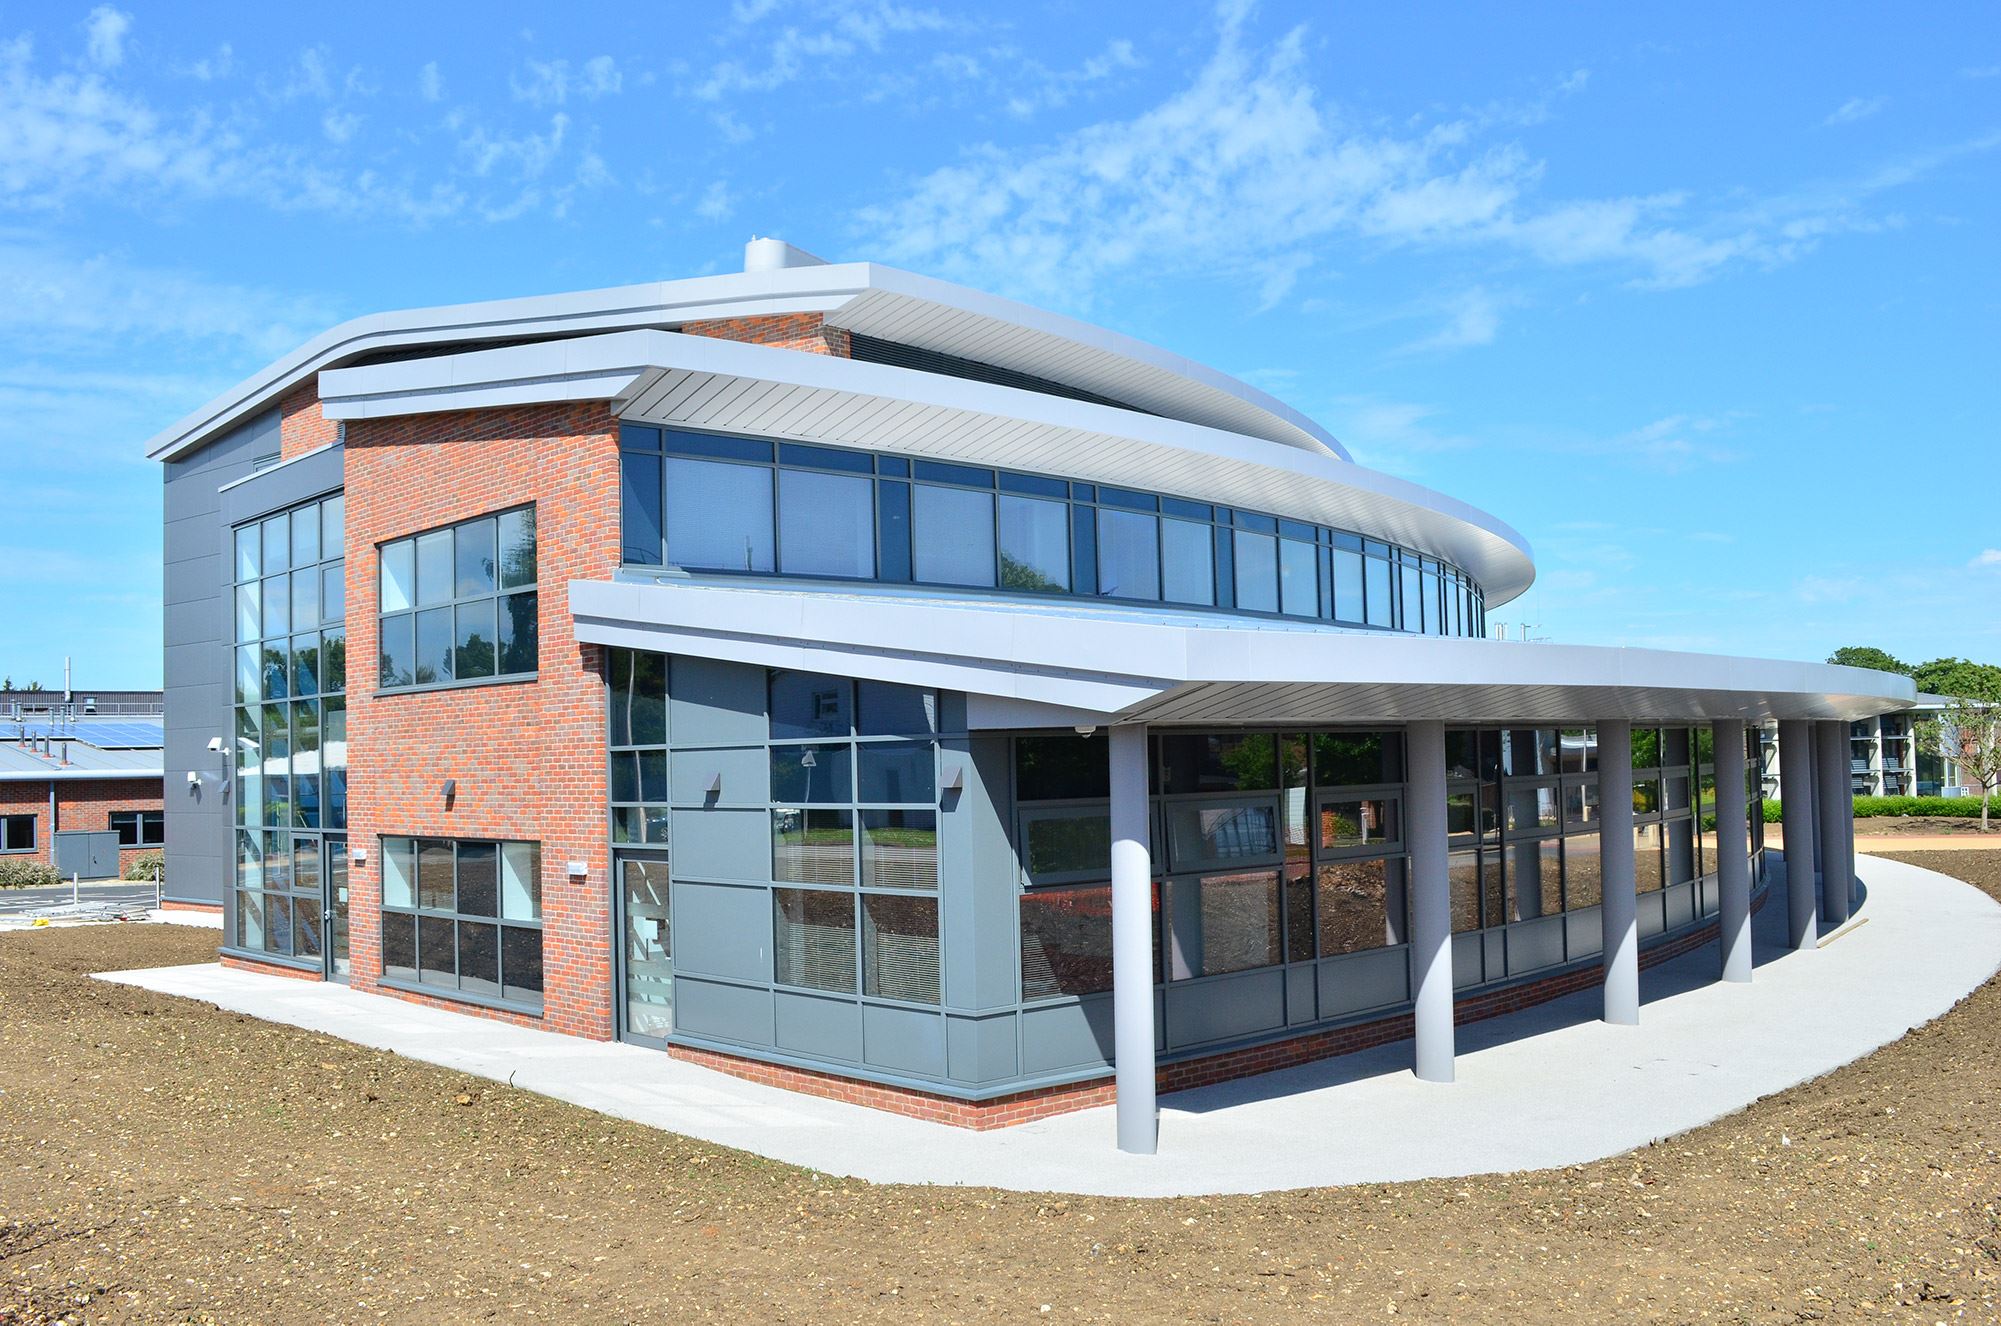 B67 Shared Services Facility, Harpenden